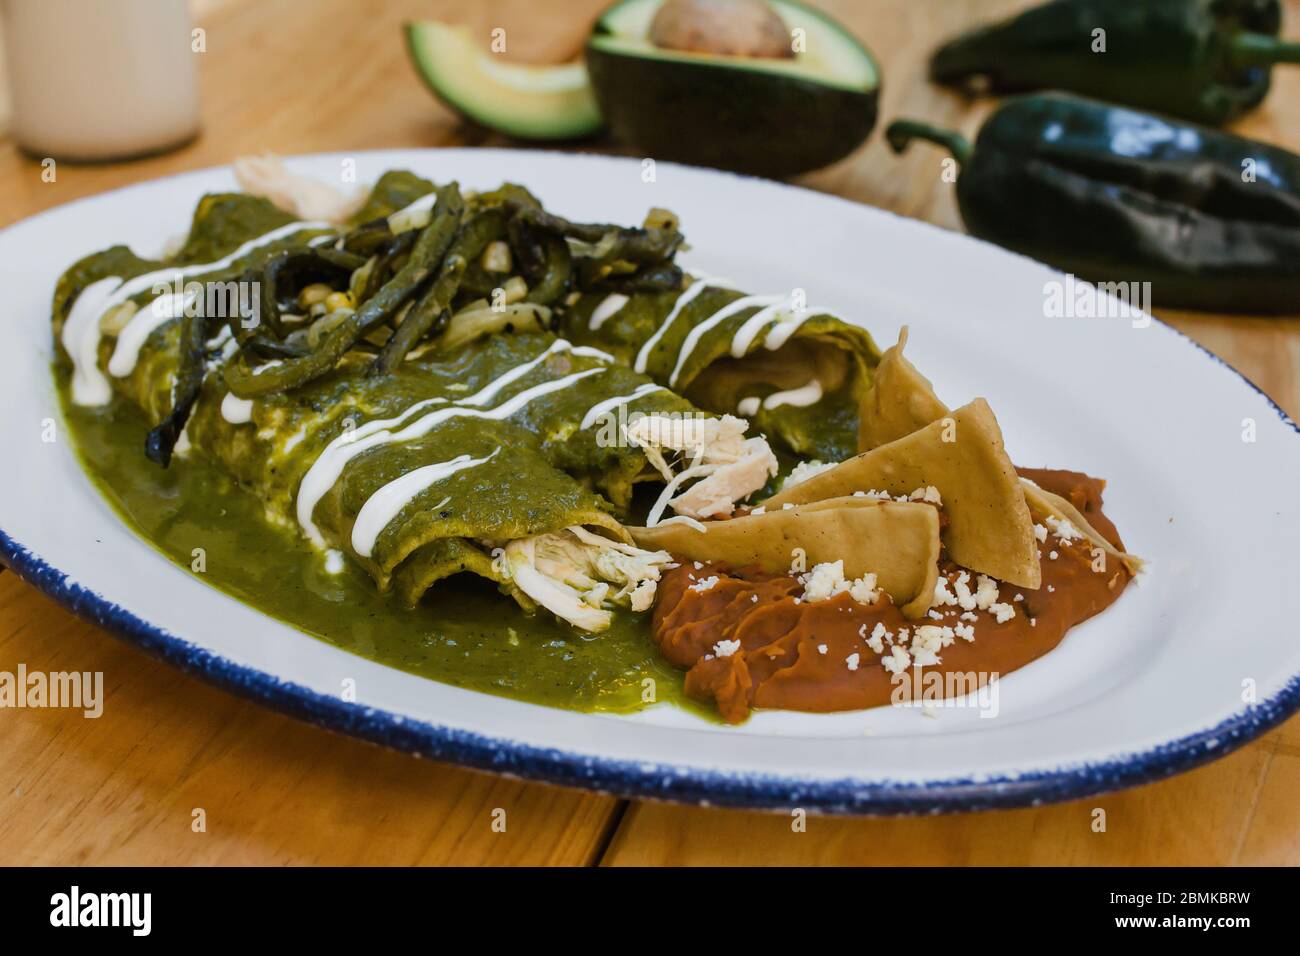 green enchiladas mexican food with tomato sauce and cheese in mexico Stock Photo